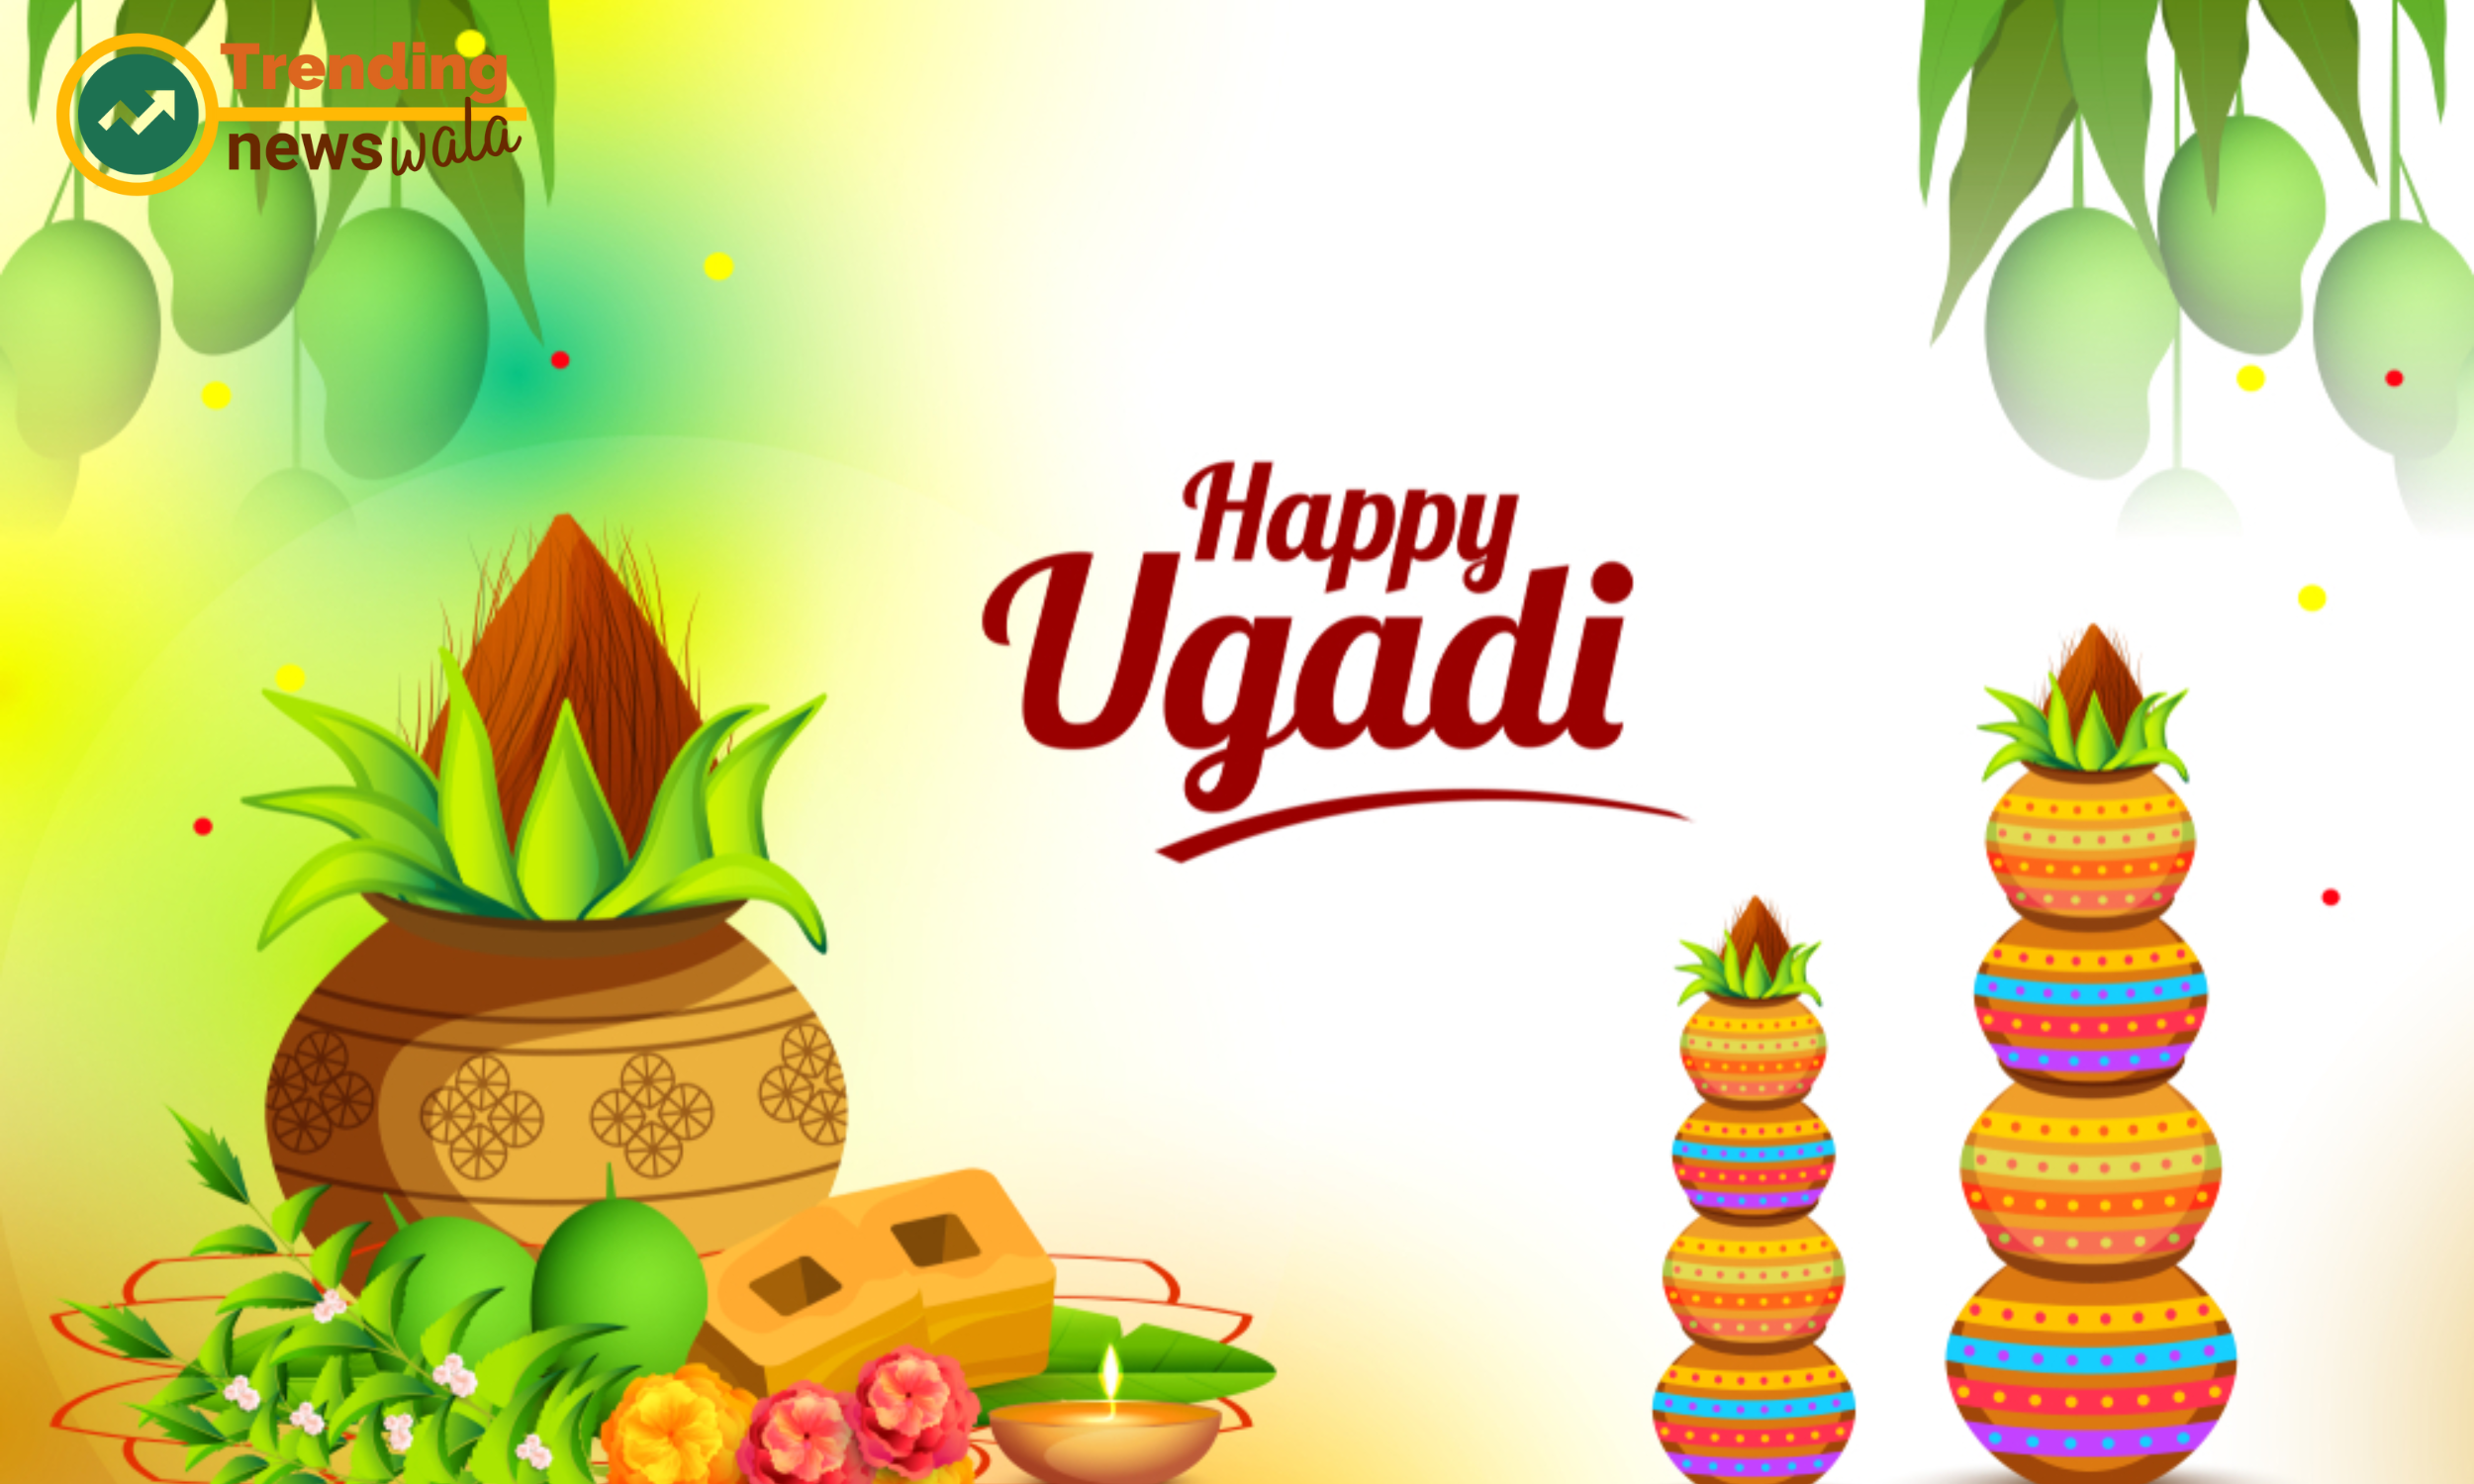 Ugadi is a time for introspection and setting intentions for the future